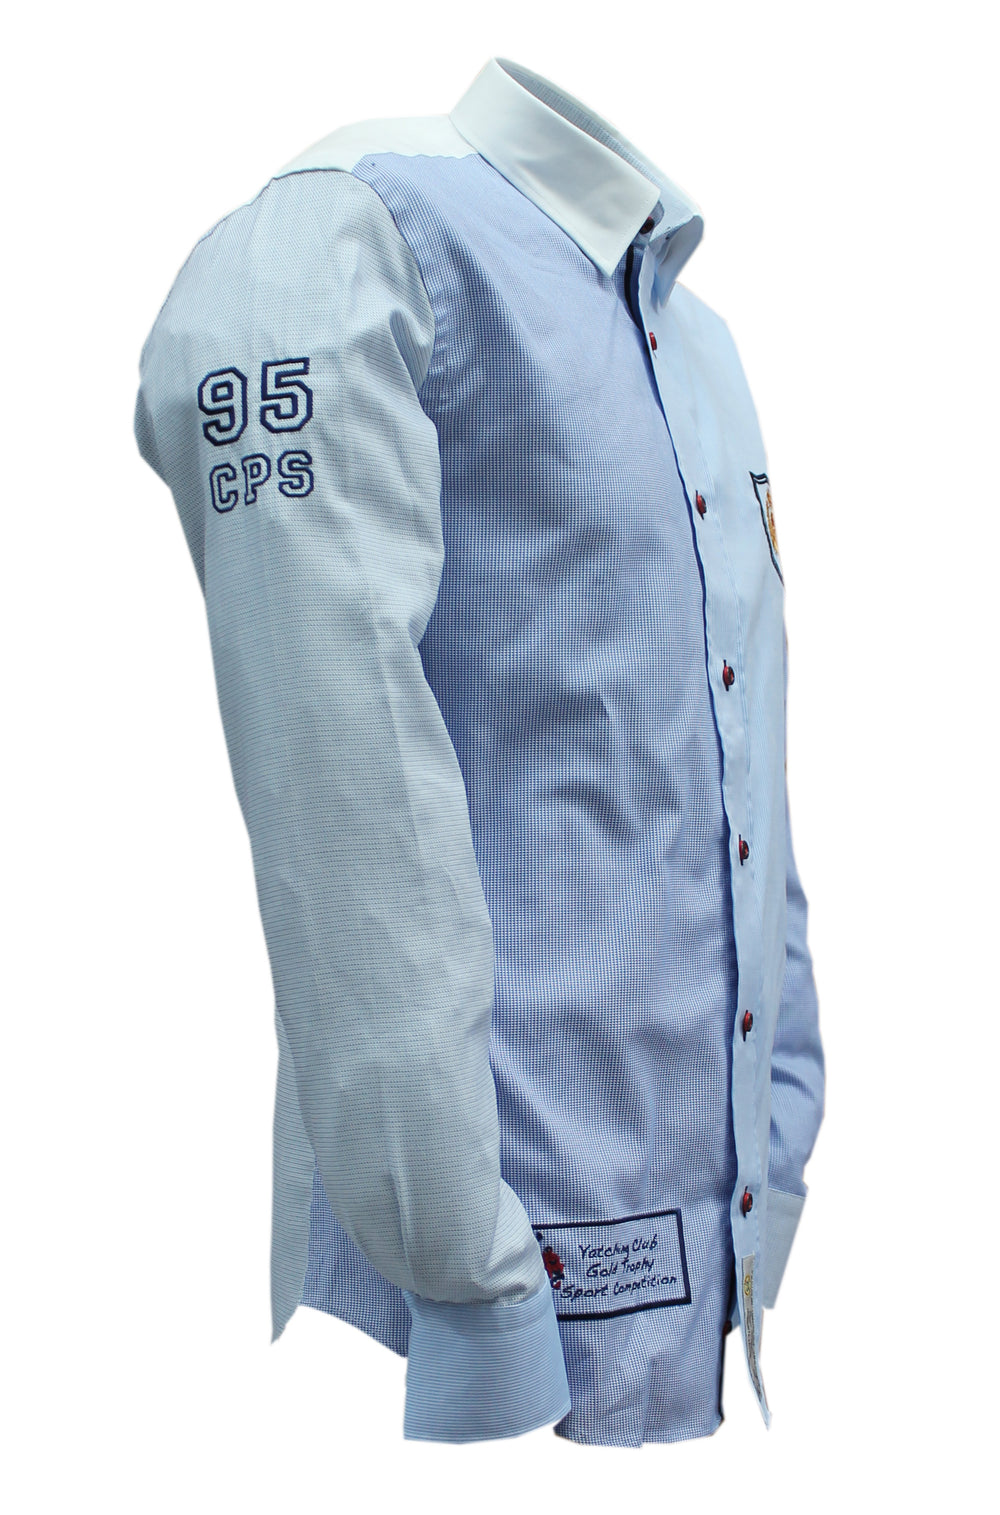 Embroidered sky blue multi sport chic shirt